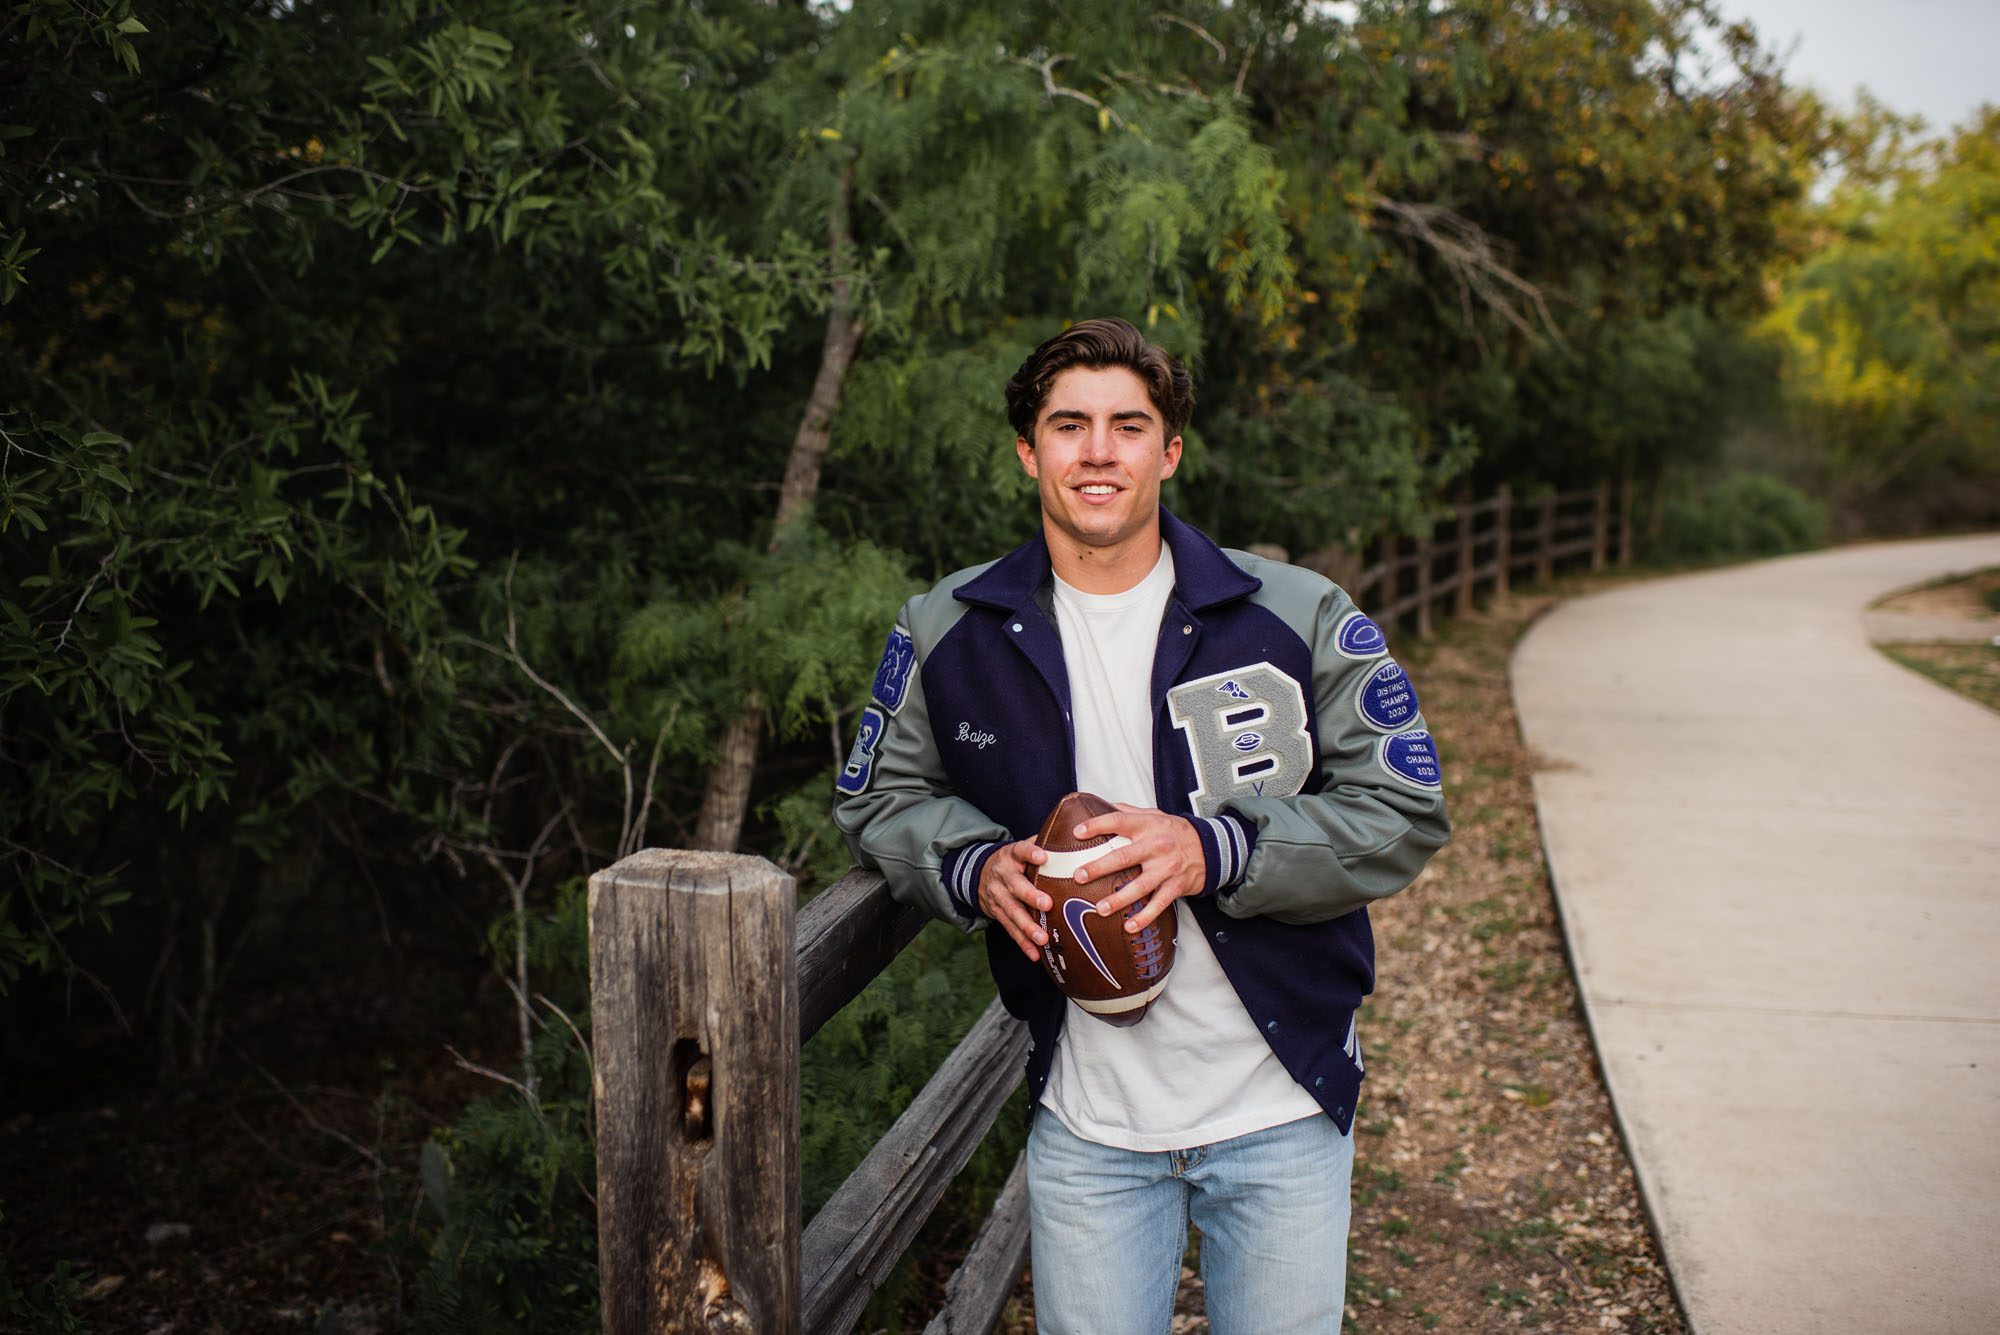 Boy holding football with letter jacket leaning on wooden fence, San Antonio senior photographer